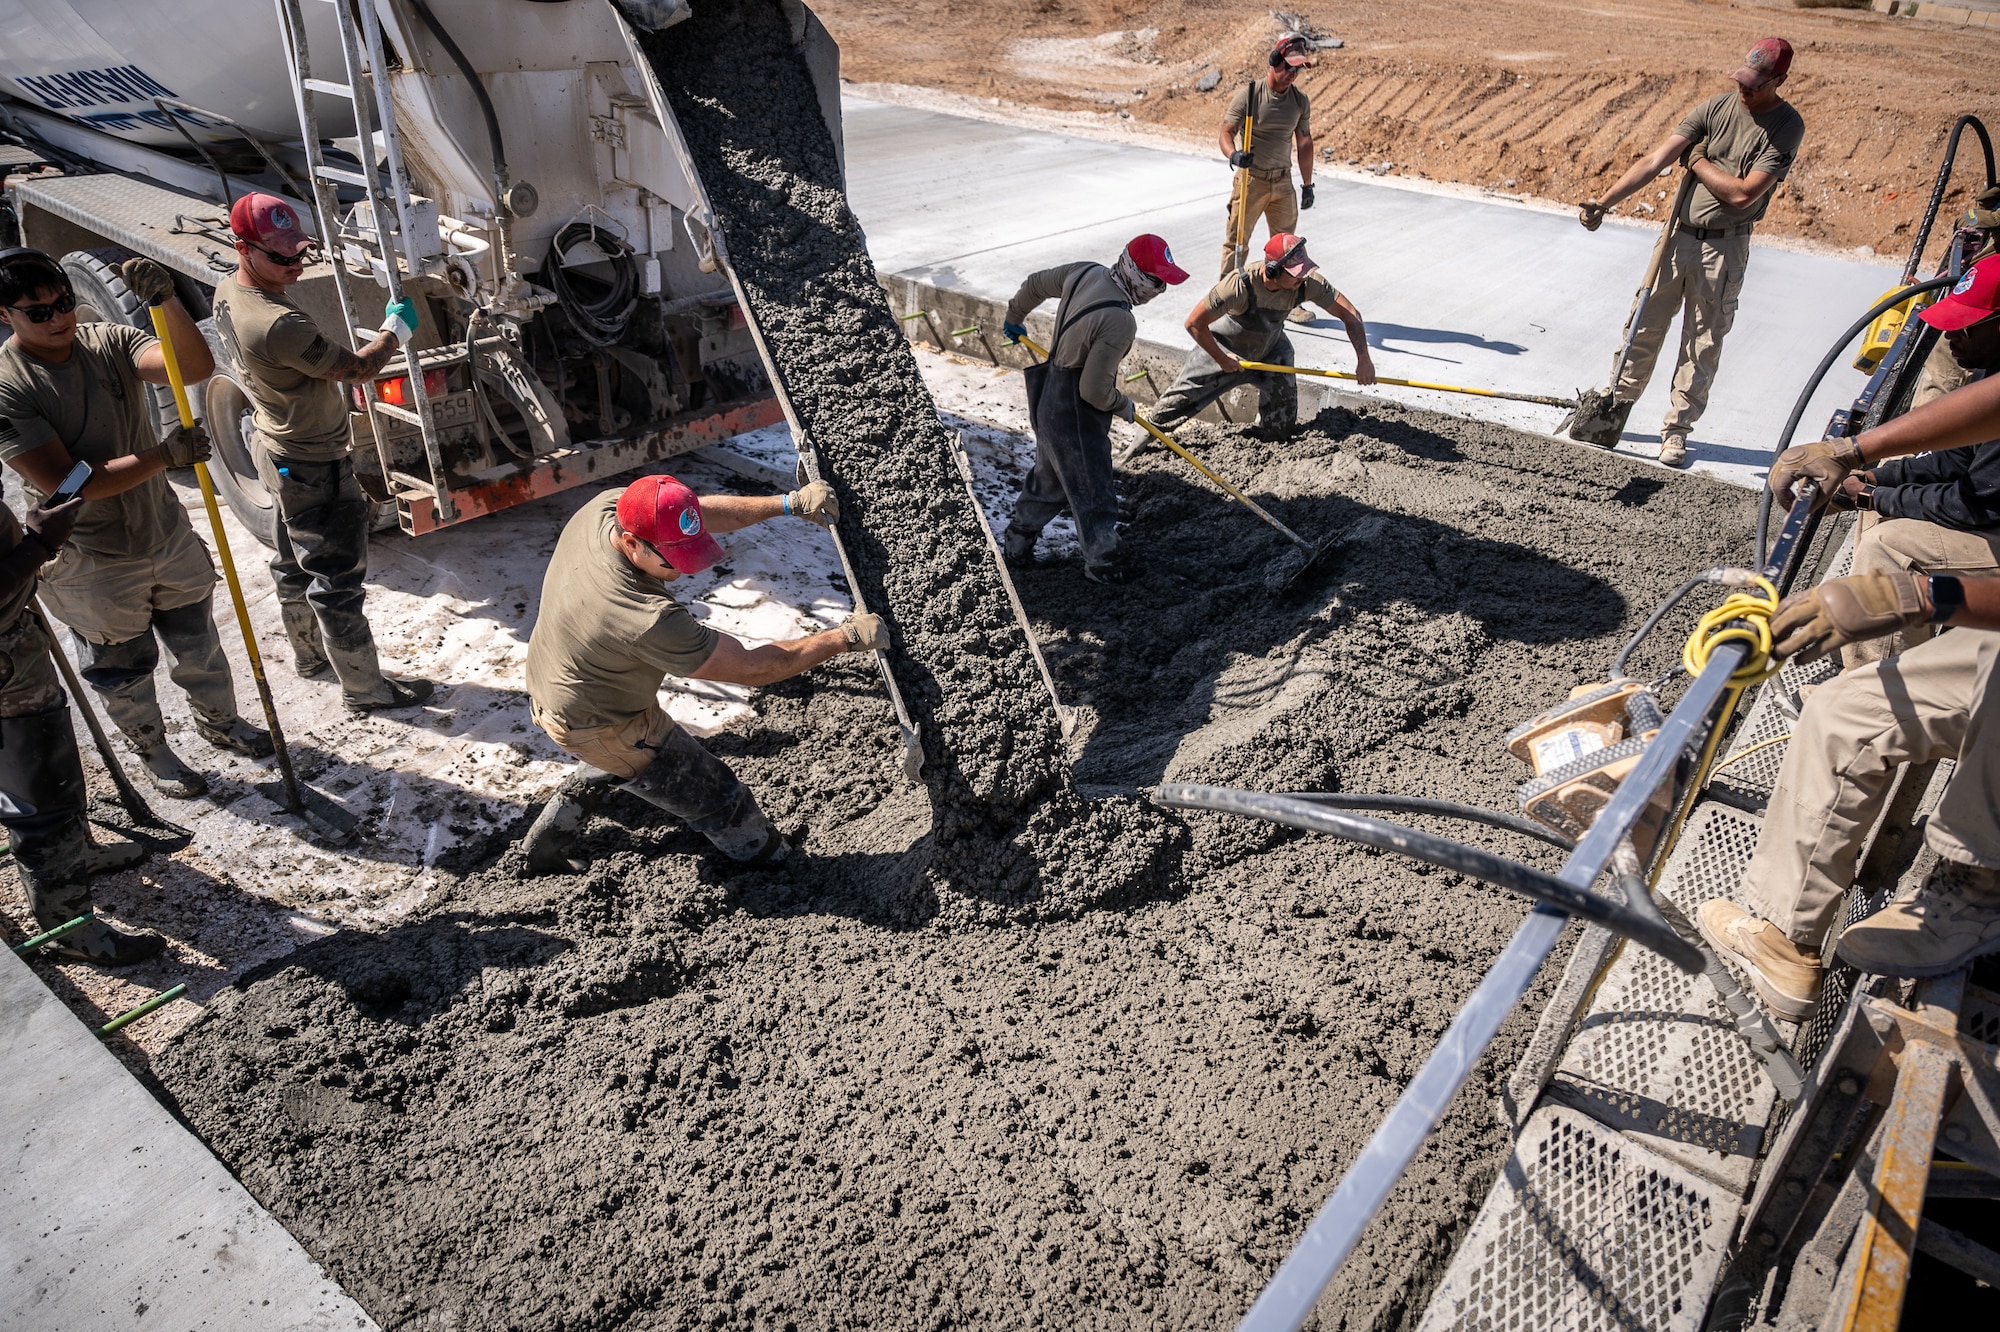 1st Expeditionary Civil Engineer Group Airmen pour more than 12,000 cubic meters of concrete for a runway overrun repair project at an undisclosed location in Southwest Asia, April 14, 2022. (U.S. Air Force photo by Master Sgt. Christopher Parr)